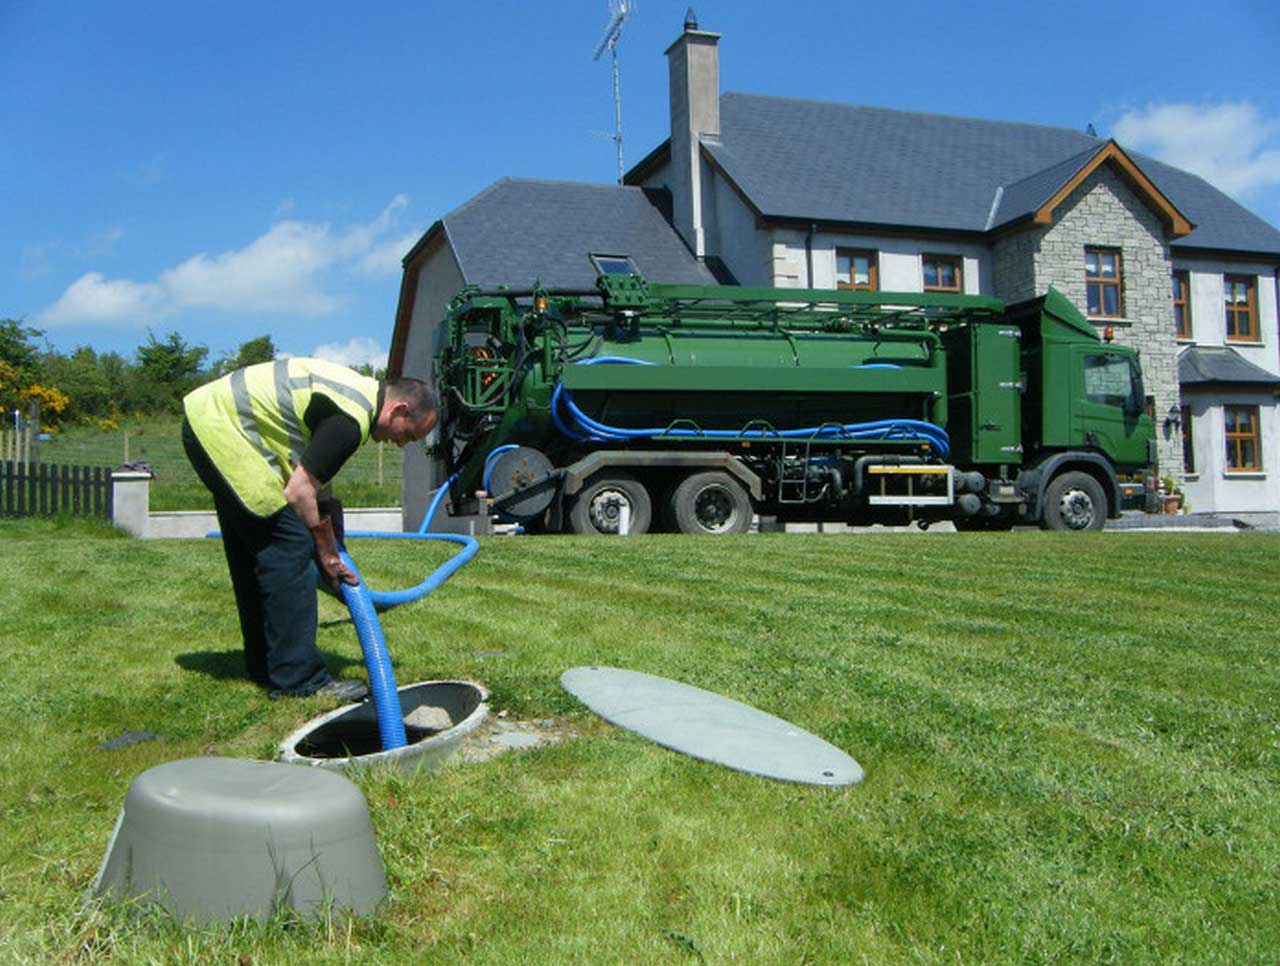 Will Septic Tank Service Fix a Clog in Toilet? | Roy Home Design